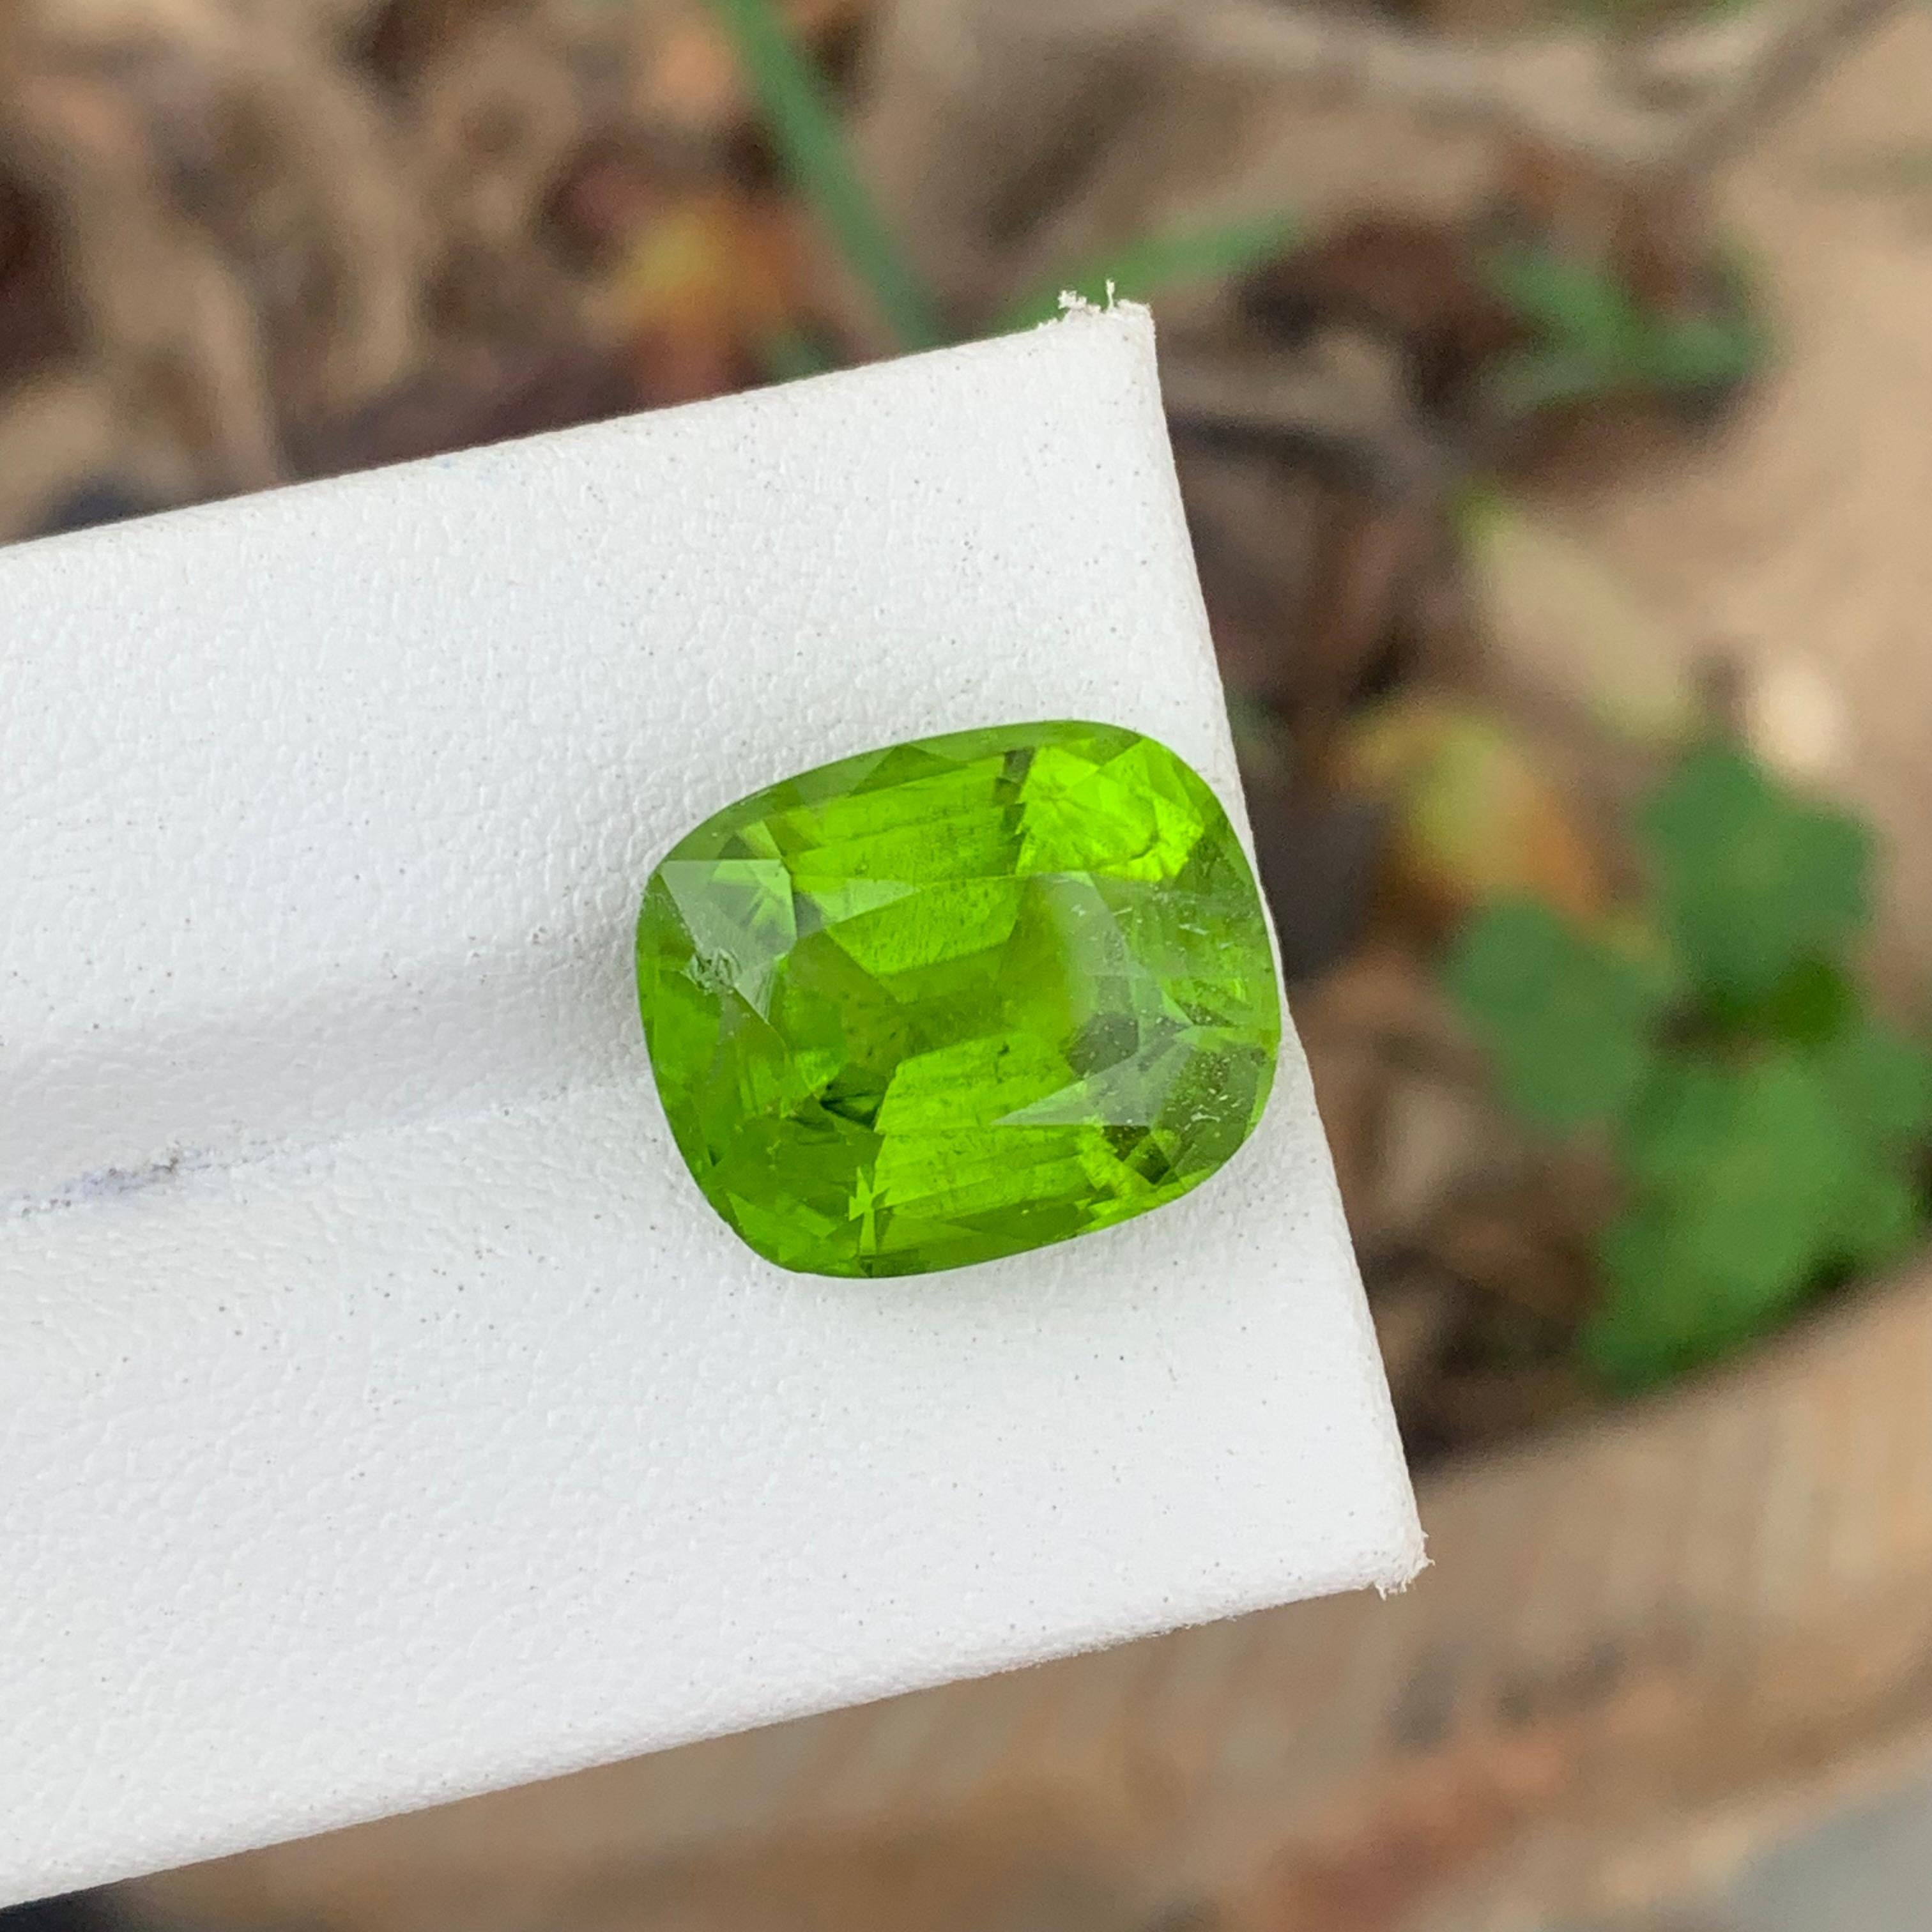 12.75 Carat Natural Cushion Cut Faceted Apple Green Peridot From Pakistan Mine For Sale 1